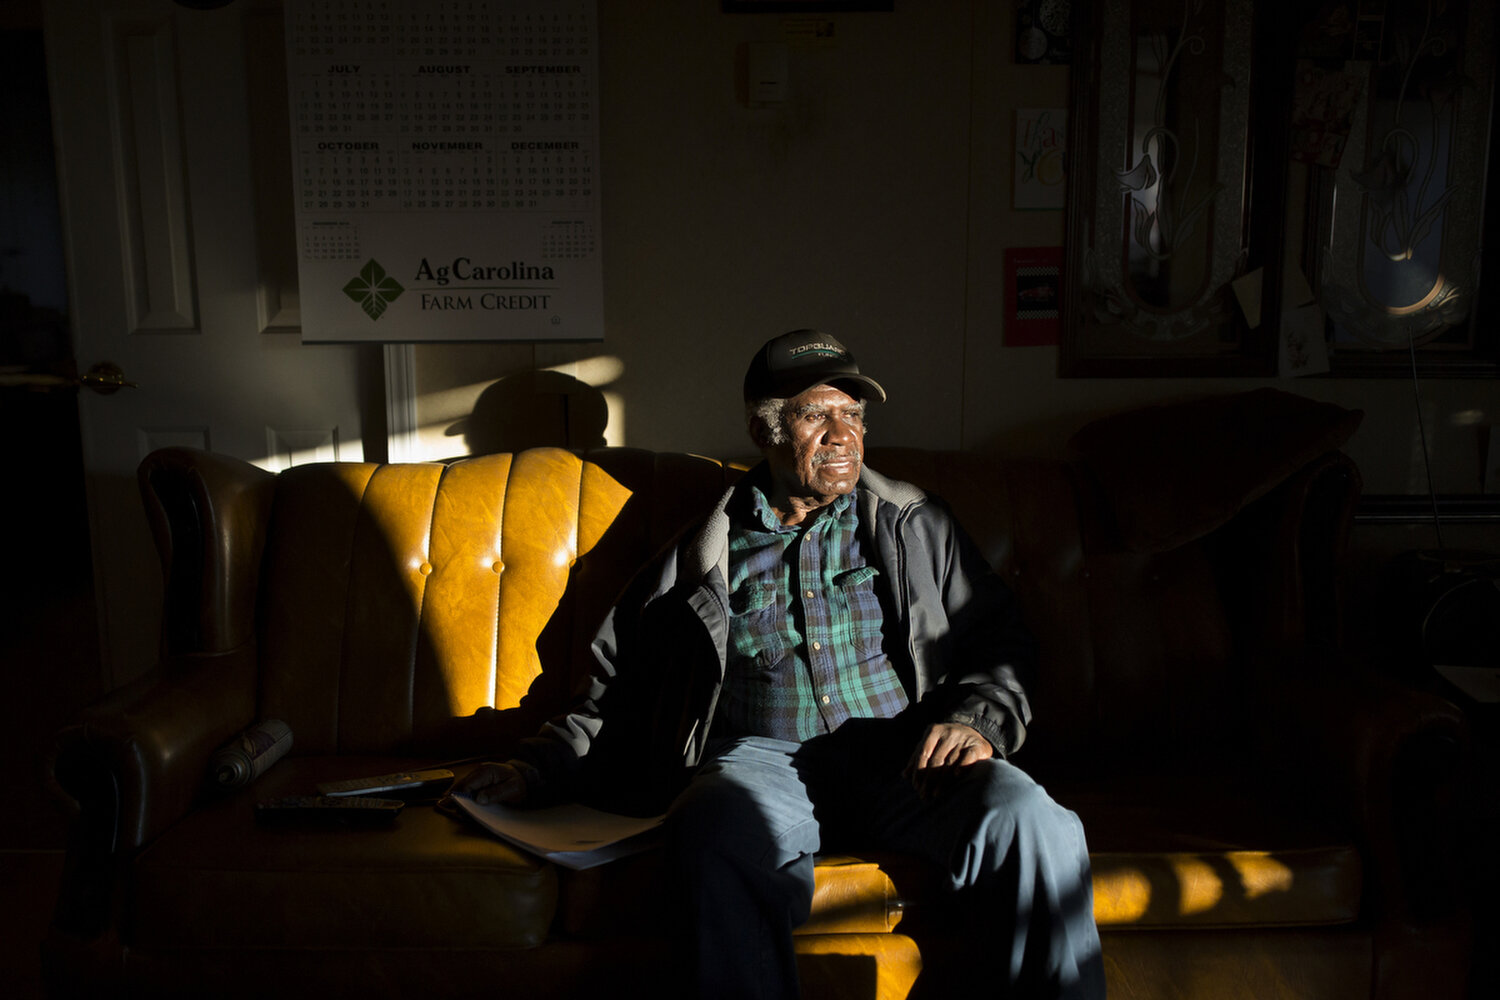  Former extension agent Haywood Harrell sits in the office on his farm in Tillery. Few Black farmers still exist in Halifax County and many Black landowners now rent their land to white farmers. Harrell, however, continues to grow cotton, corn, soybe